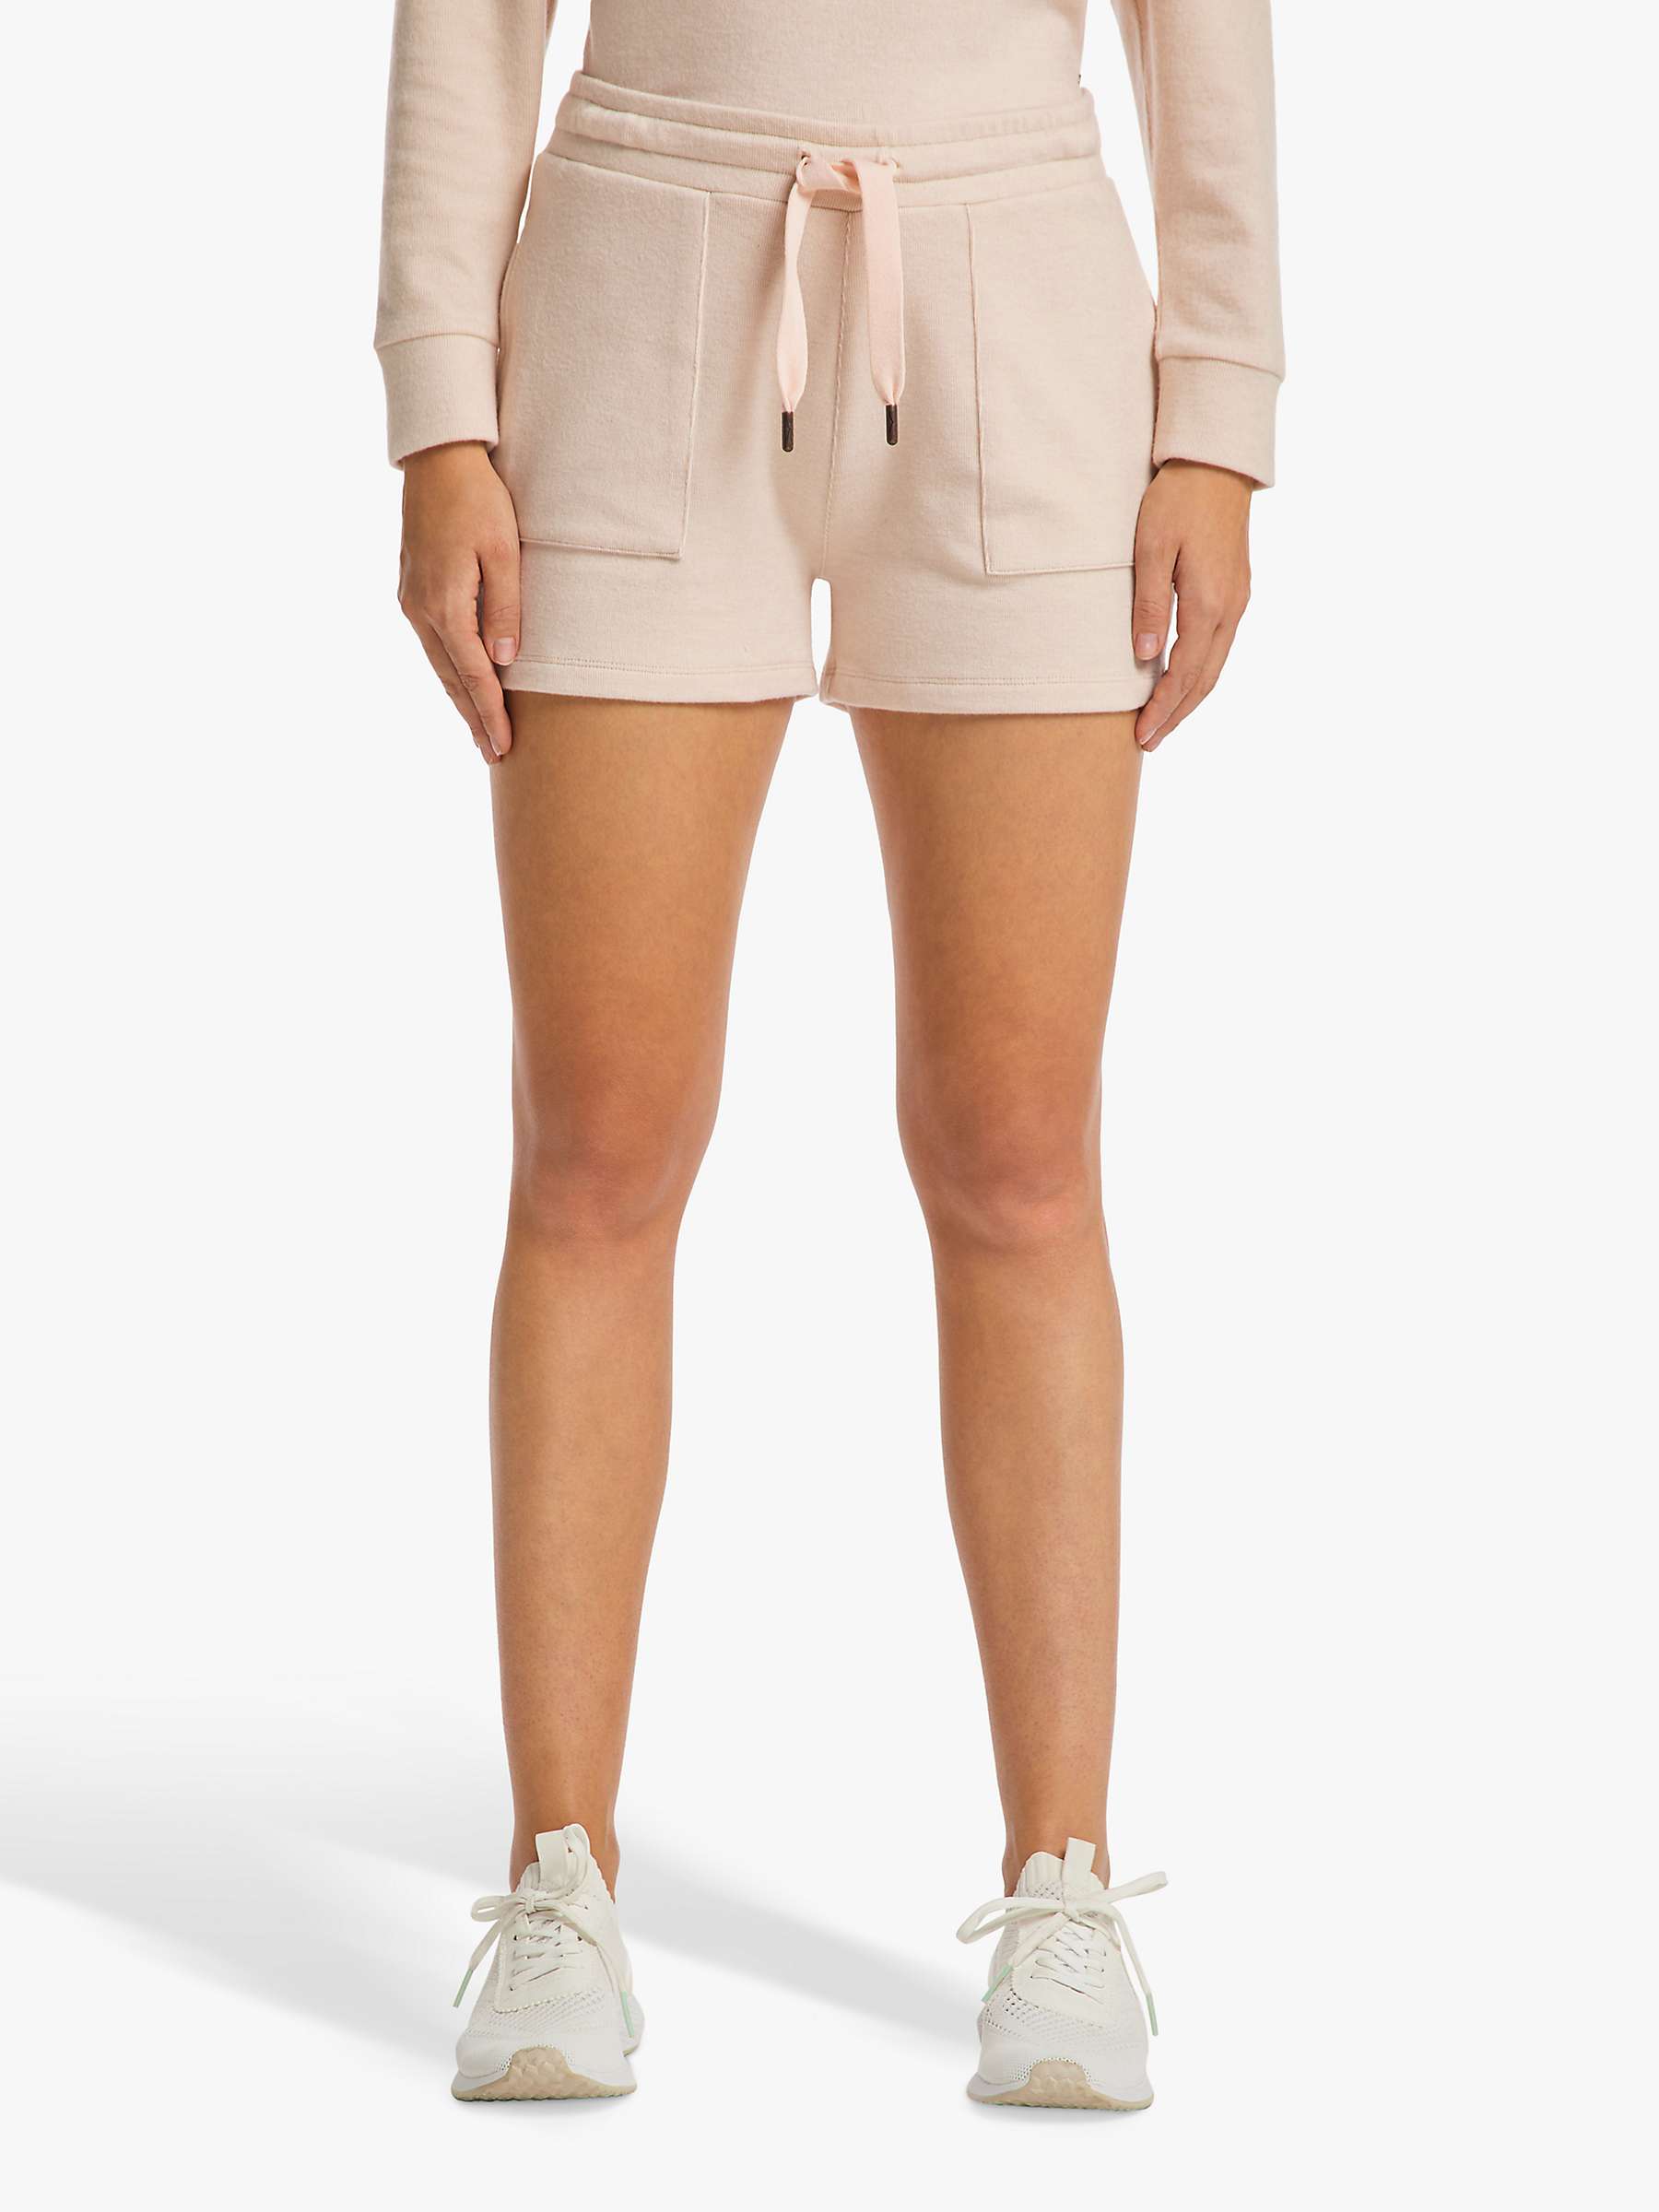 Buy Venice Beach Aileen Shorts, Marble Pink Online at johnlewis.com